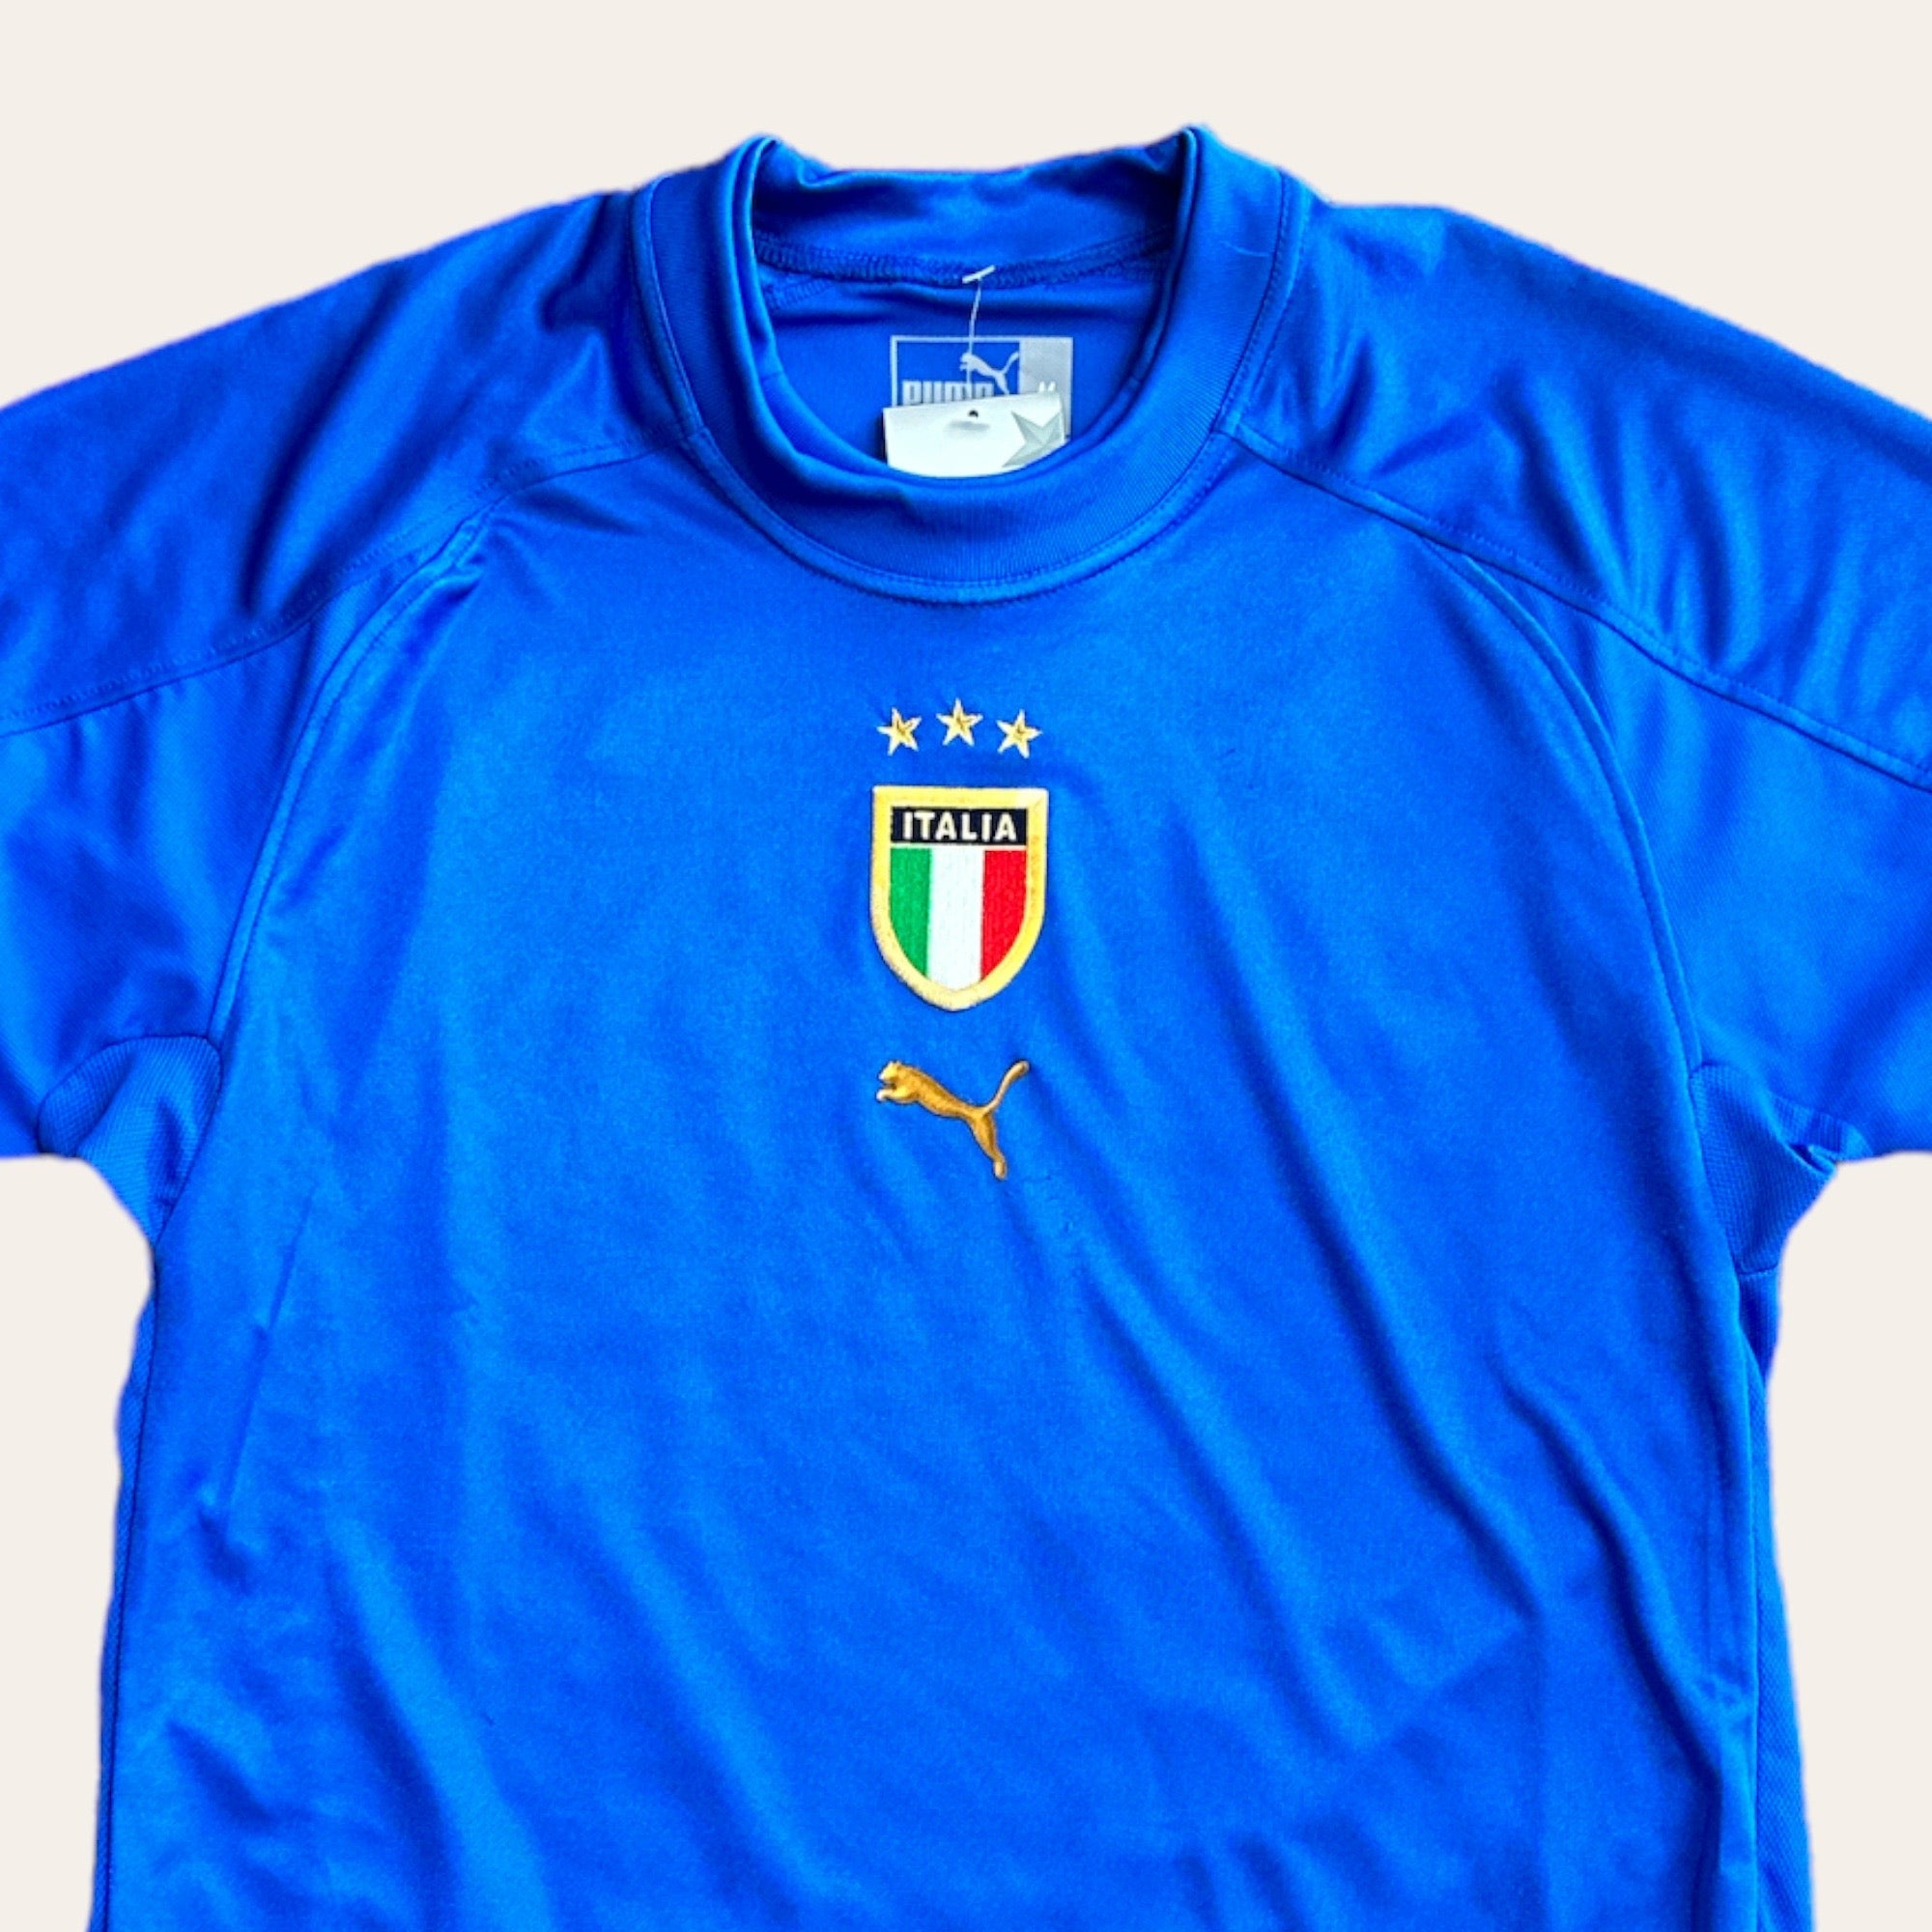 04/05 Brand New Italy Kit Size M